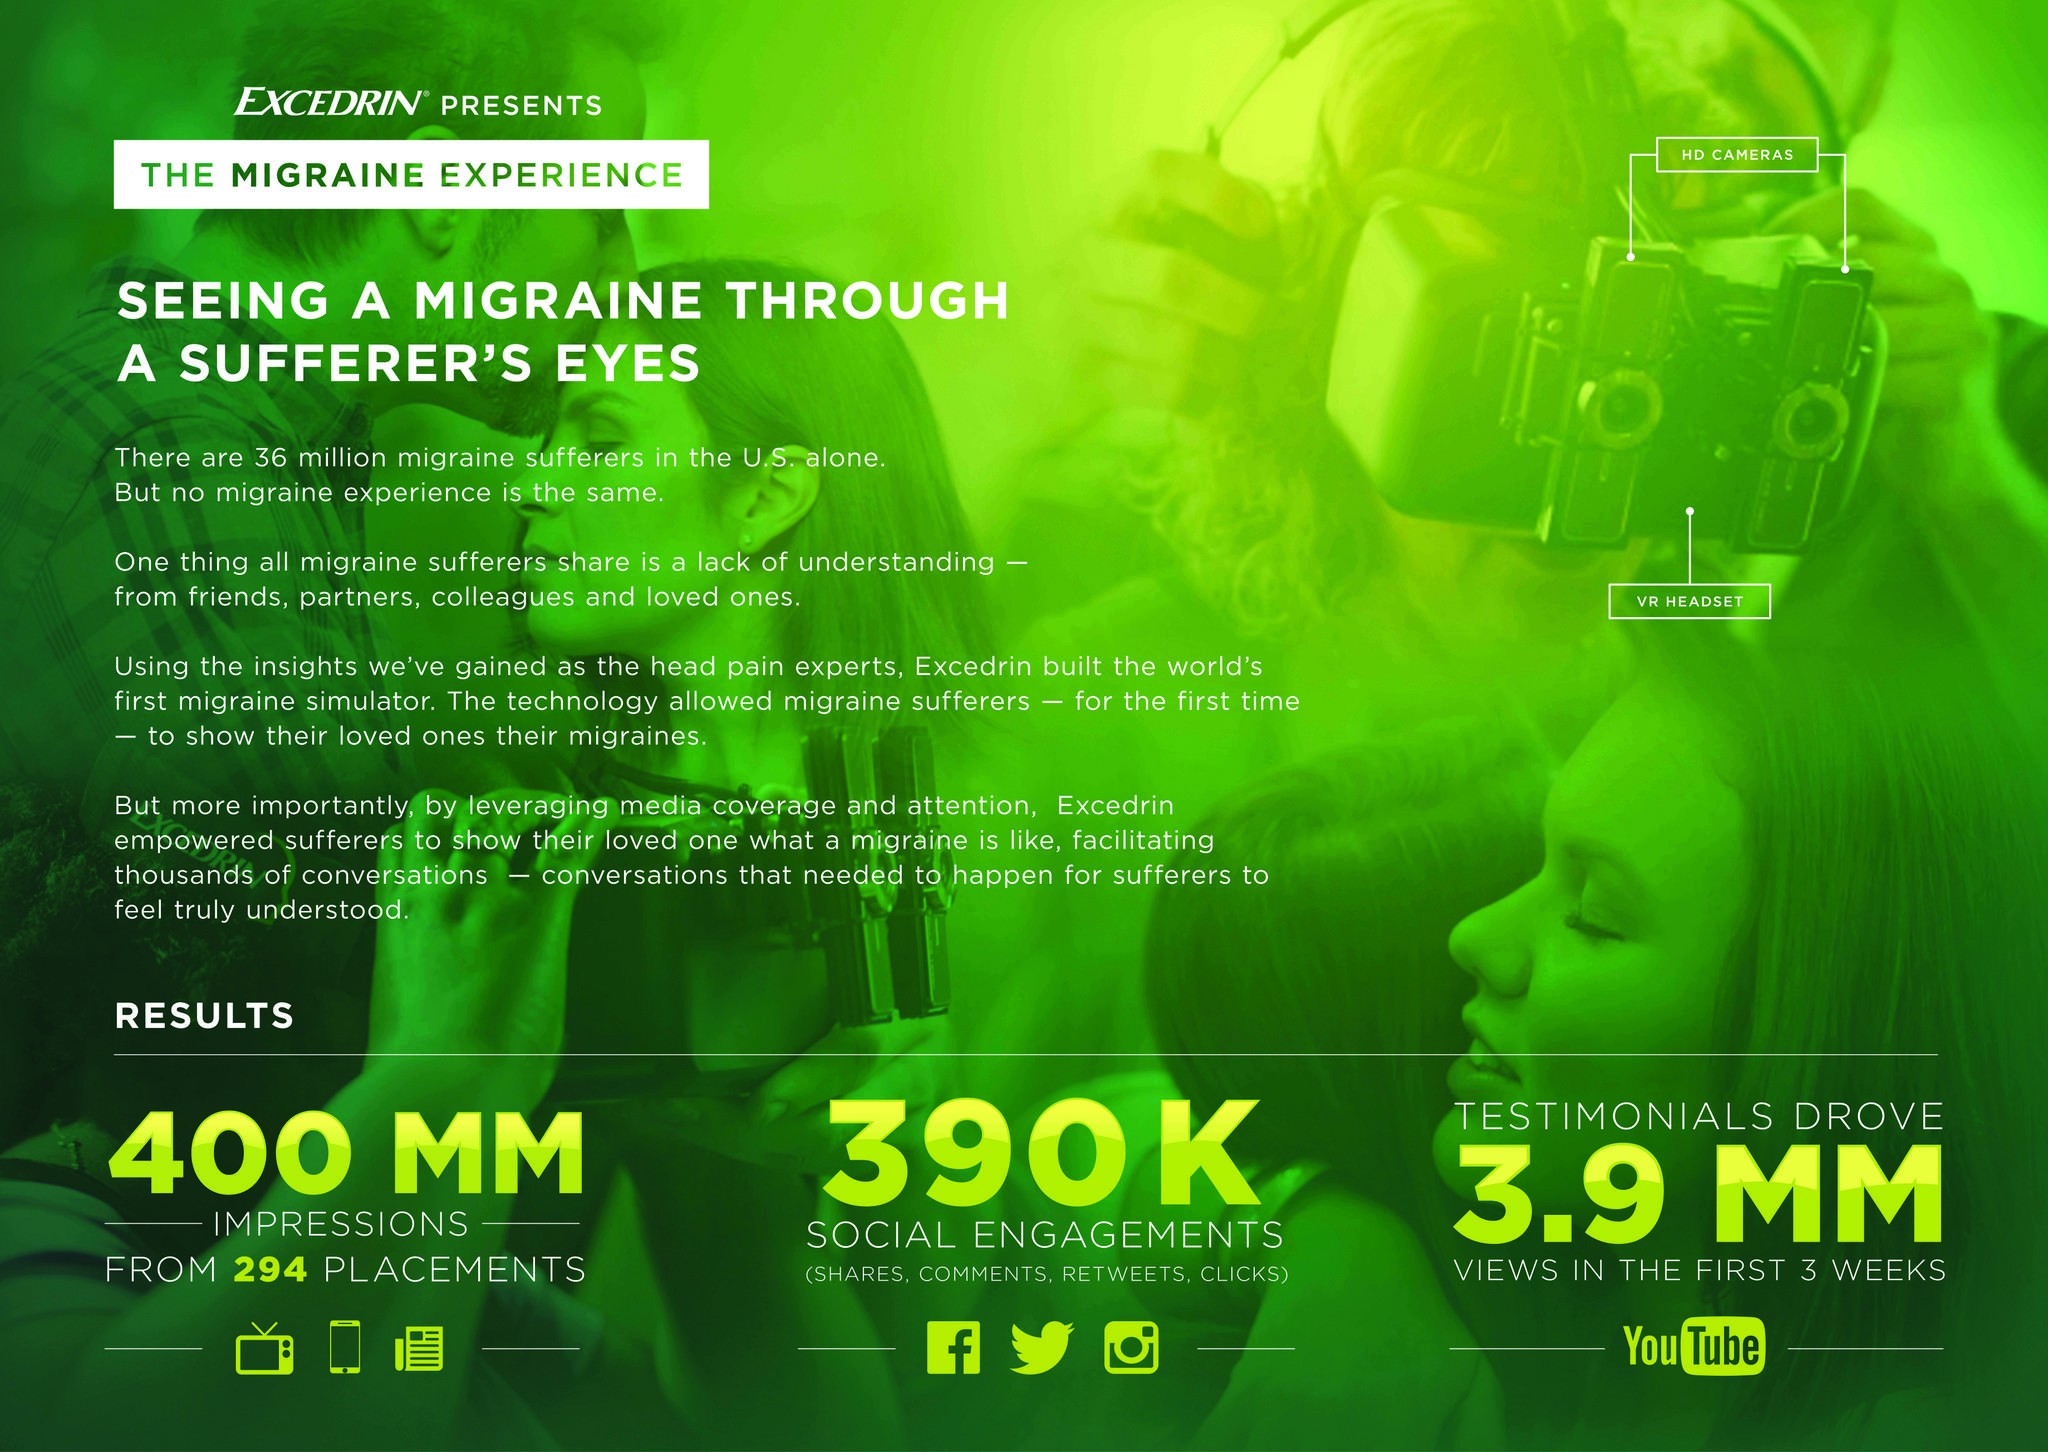 THE MIGRAINE EXPERIENCE PRESENTED BY EXCEDRIN